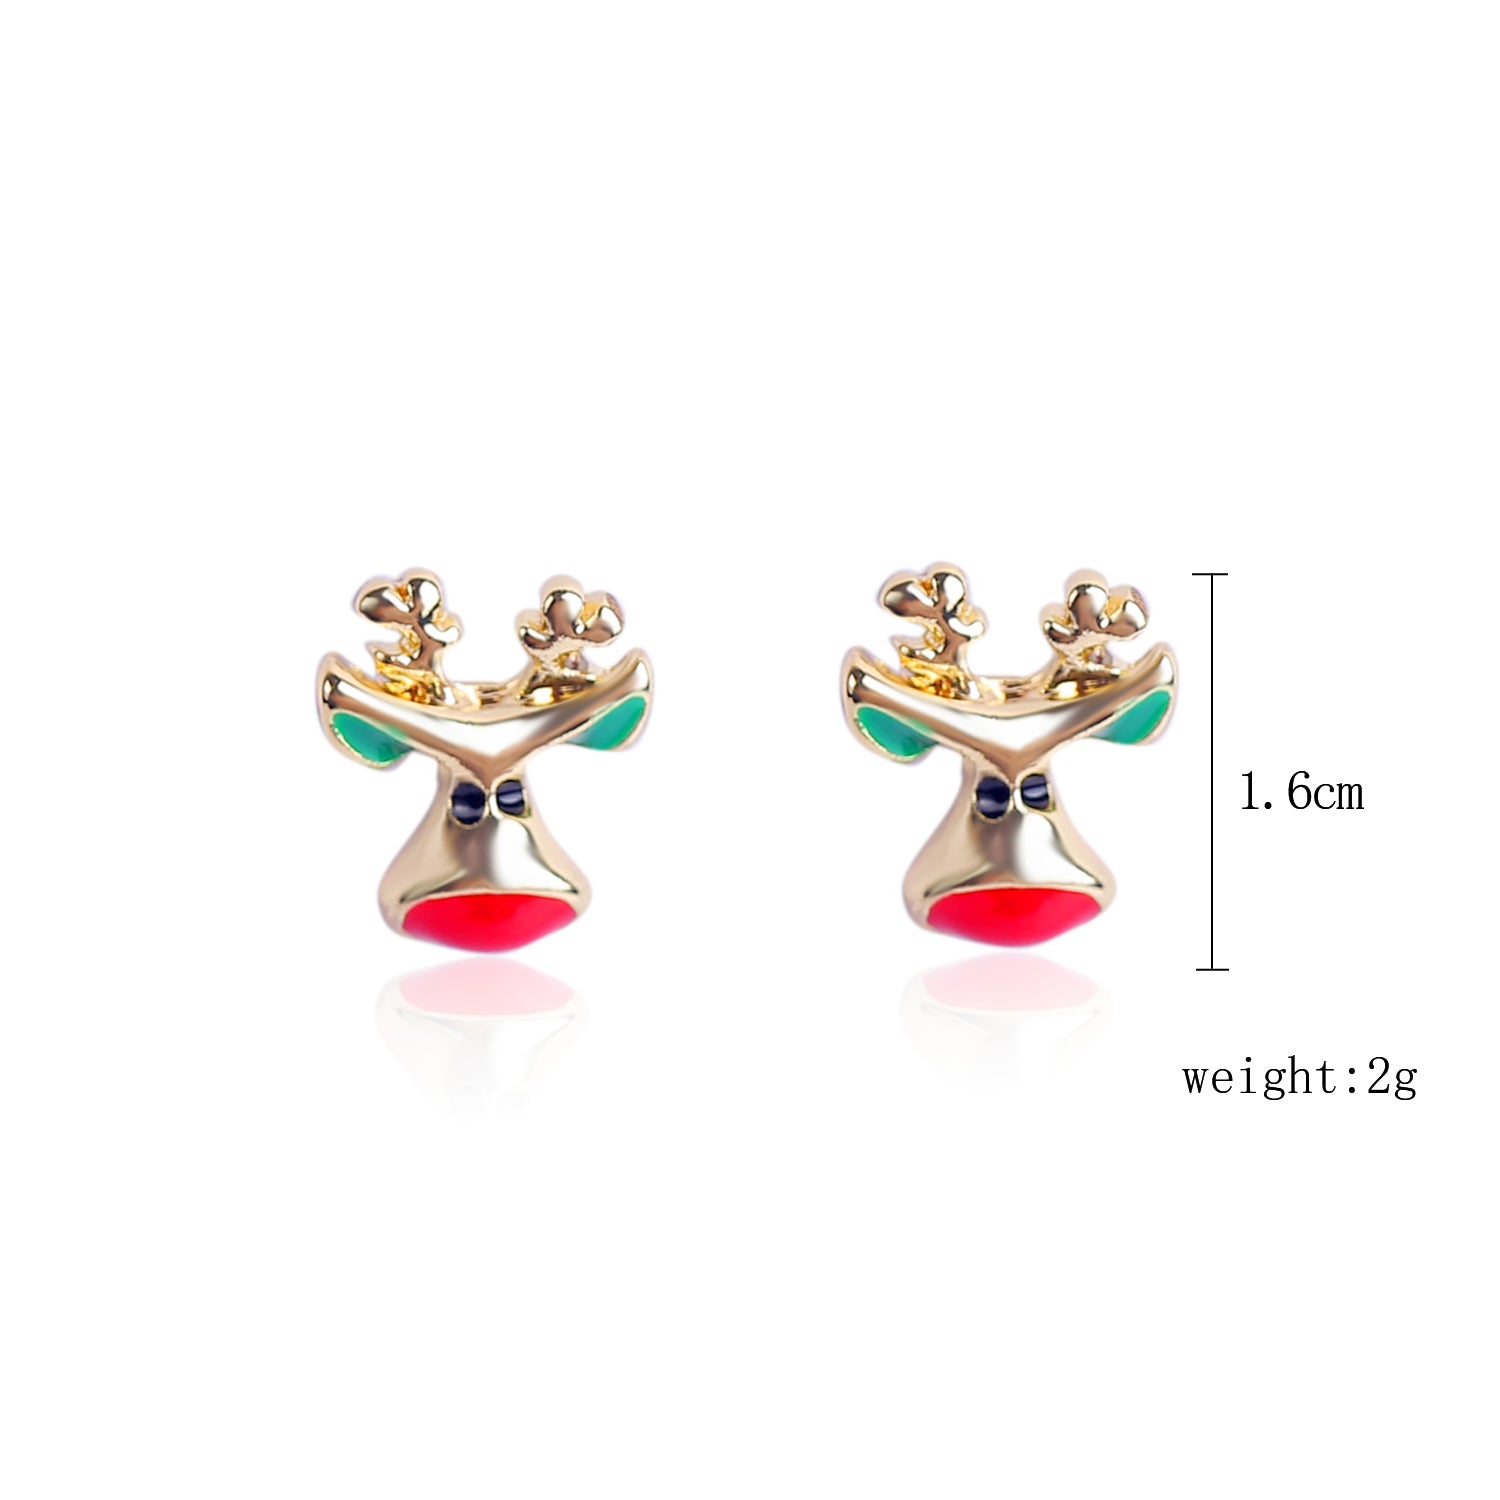 9-12 Pairs Women Christmas Earring Stud Set, Cute Festive Jewelry Hypoallergenic Christmas Gifts for Kids Teens Girls